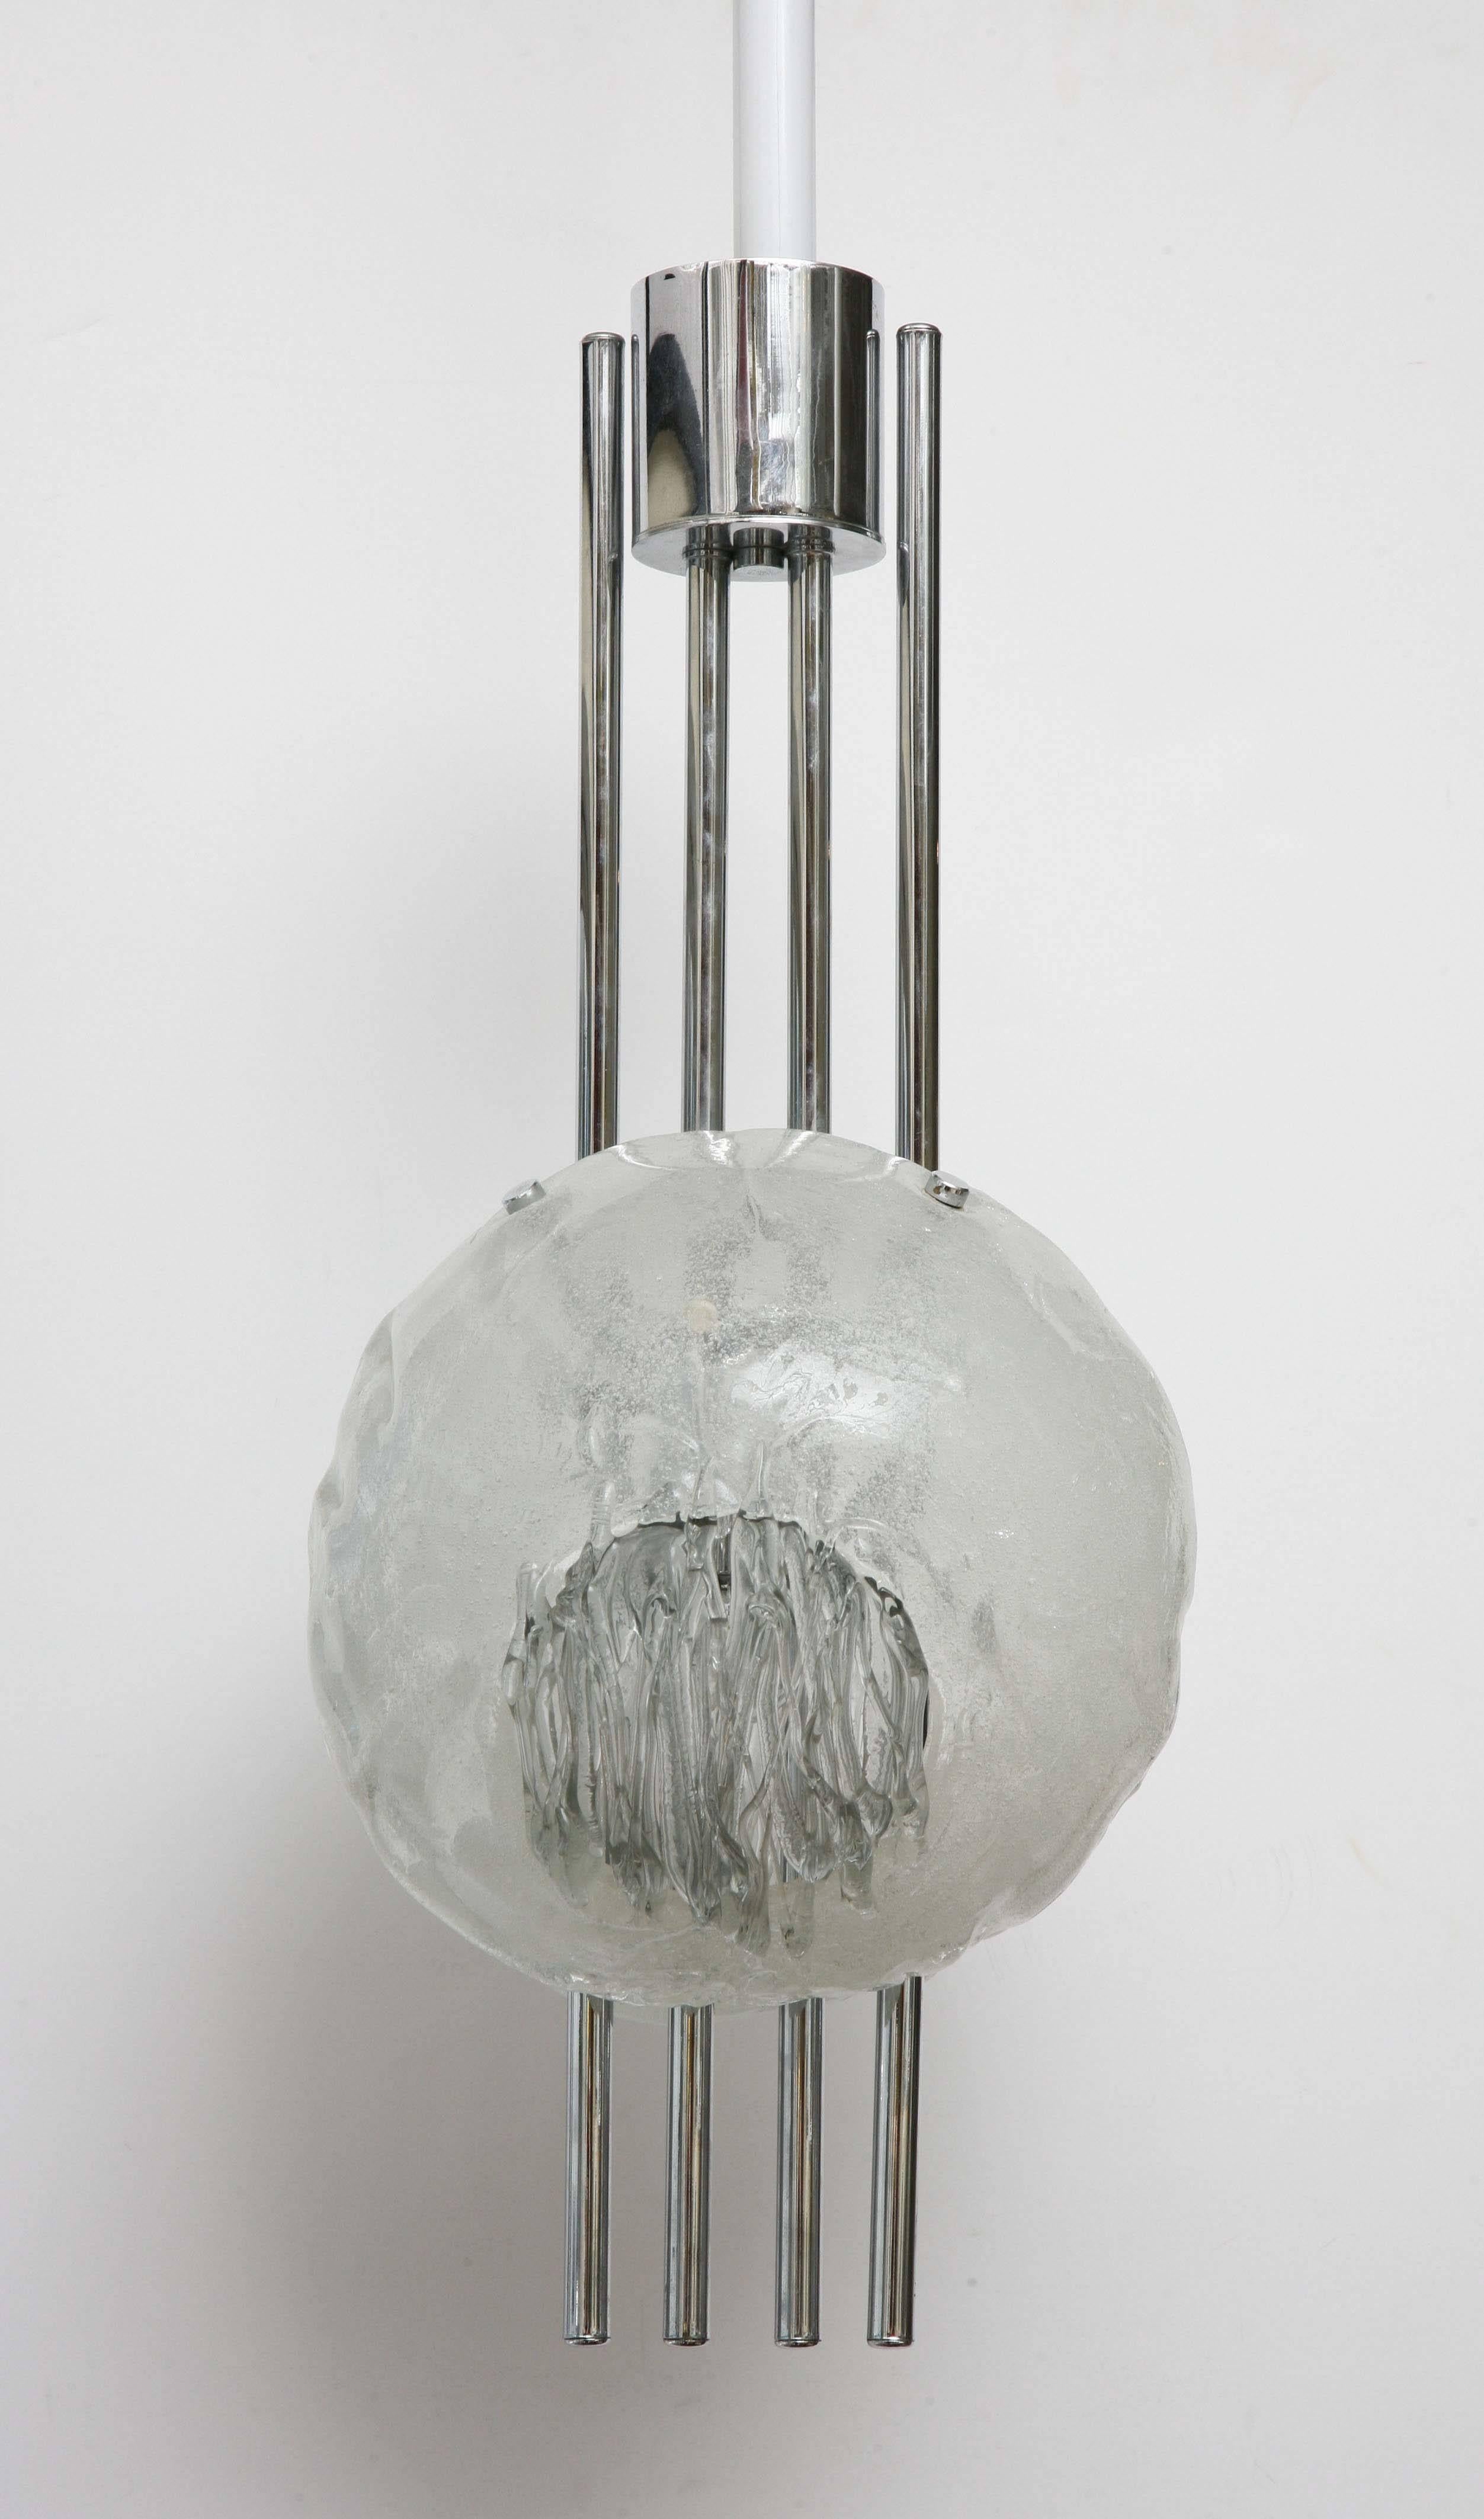 Mid-Century Modern chrome and murano glass pendant light fixture by Angelo Brotto for Esperia.
Wired for the U.S. and uses two light bulbs with max. 60 wattage.
The glass pieces have a myriad of different details.
   